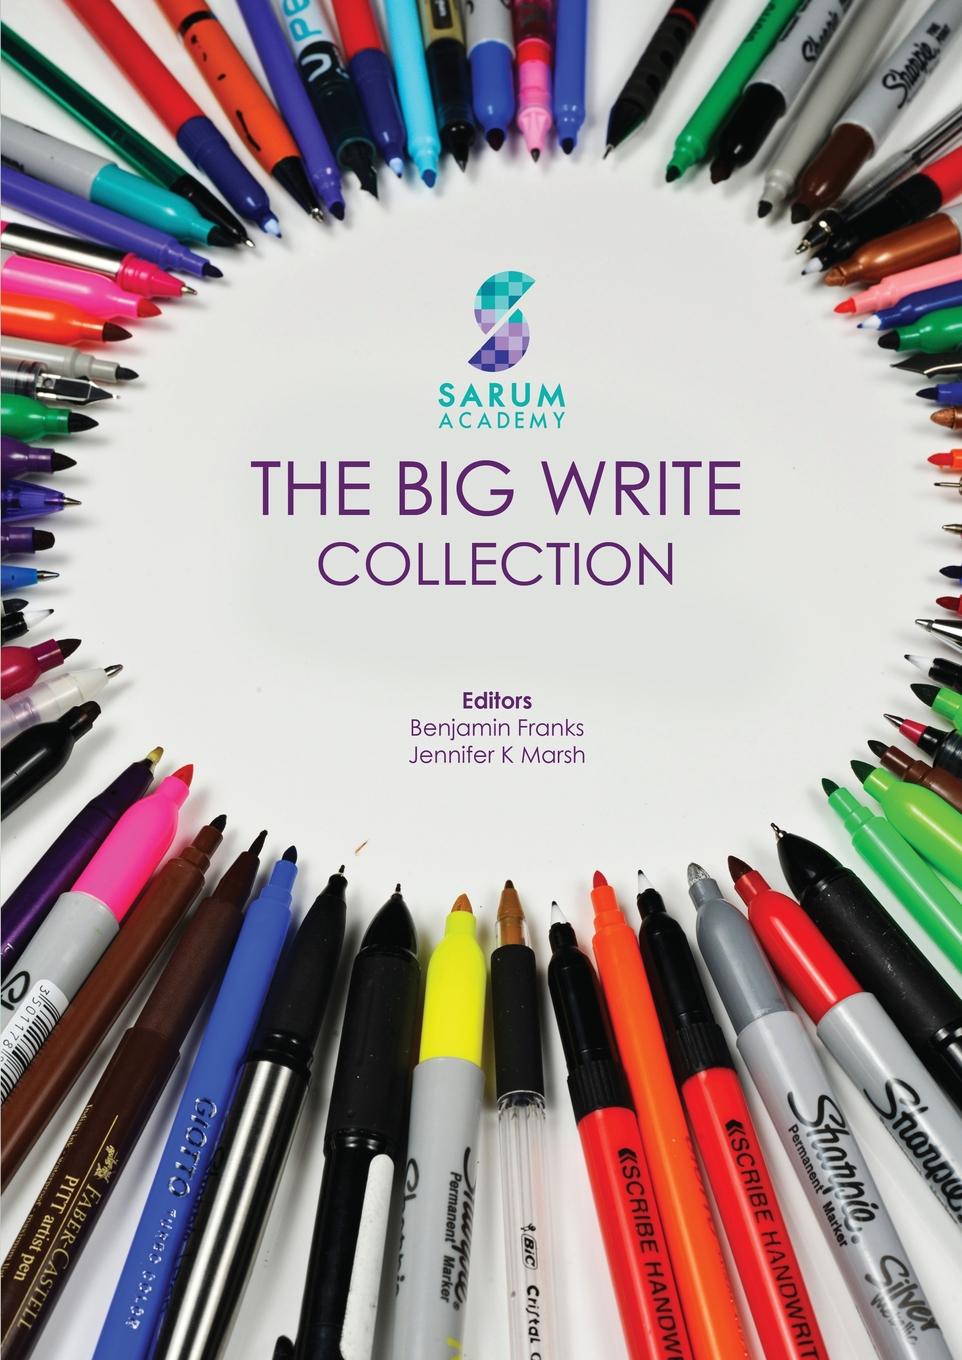 Writing collection. Spring collection write.